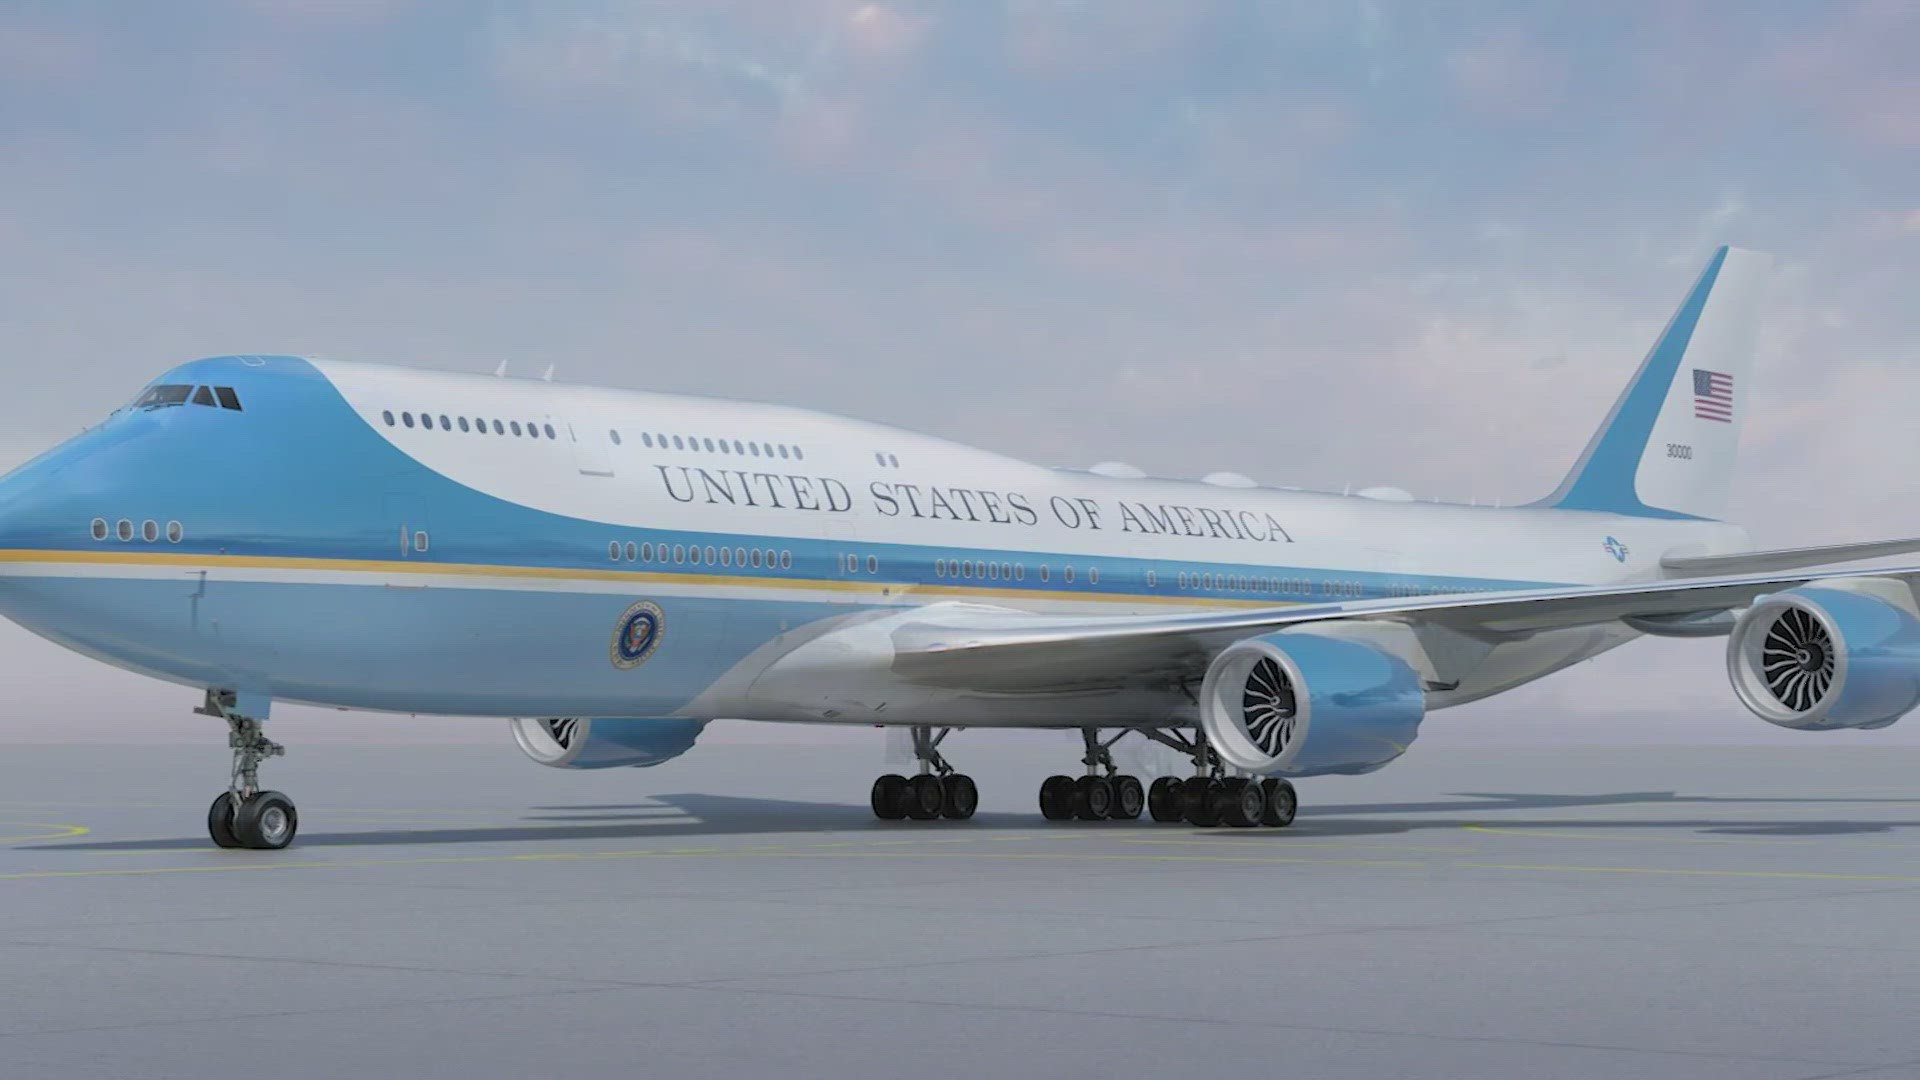 The plane's iconic Kennedy-era robin's egg blue and white design has remained virtually unchanged throughout the years.